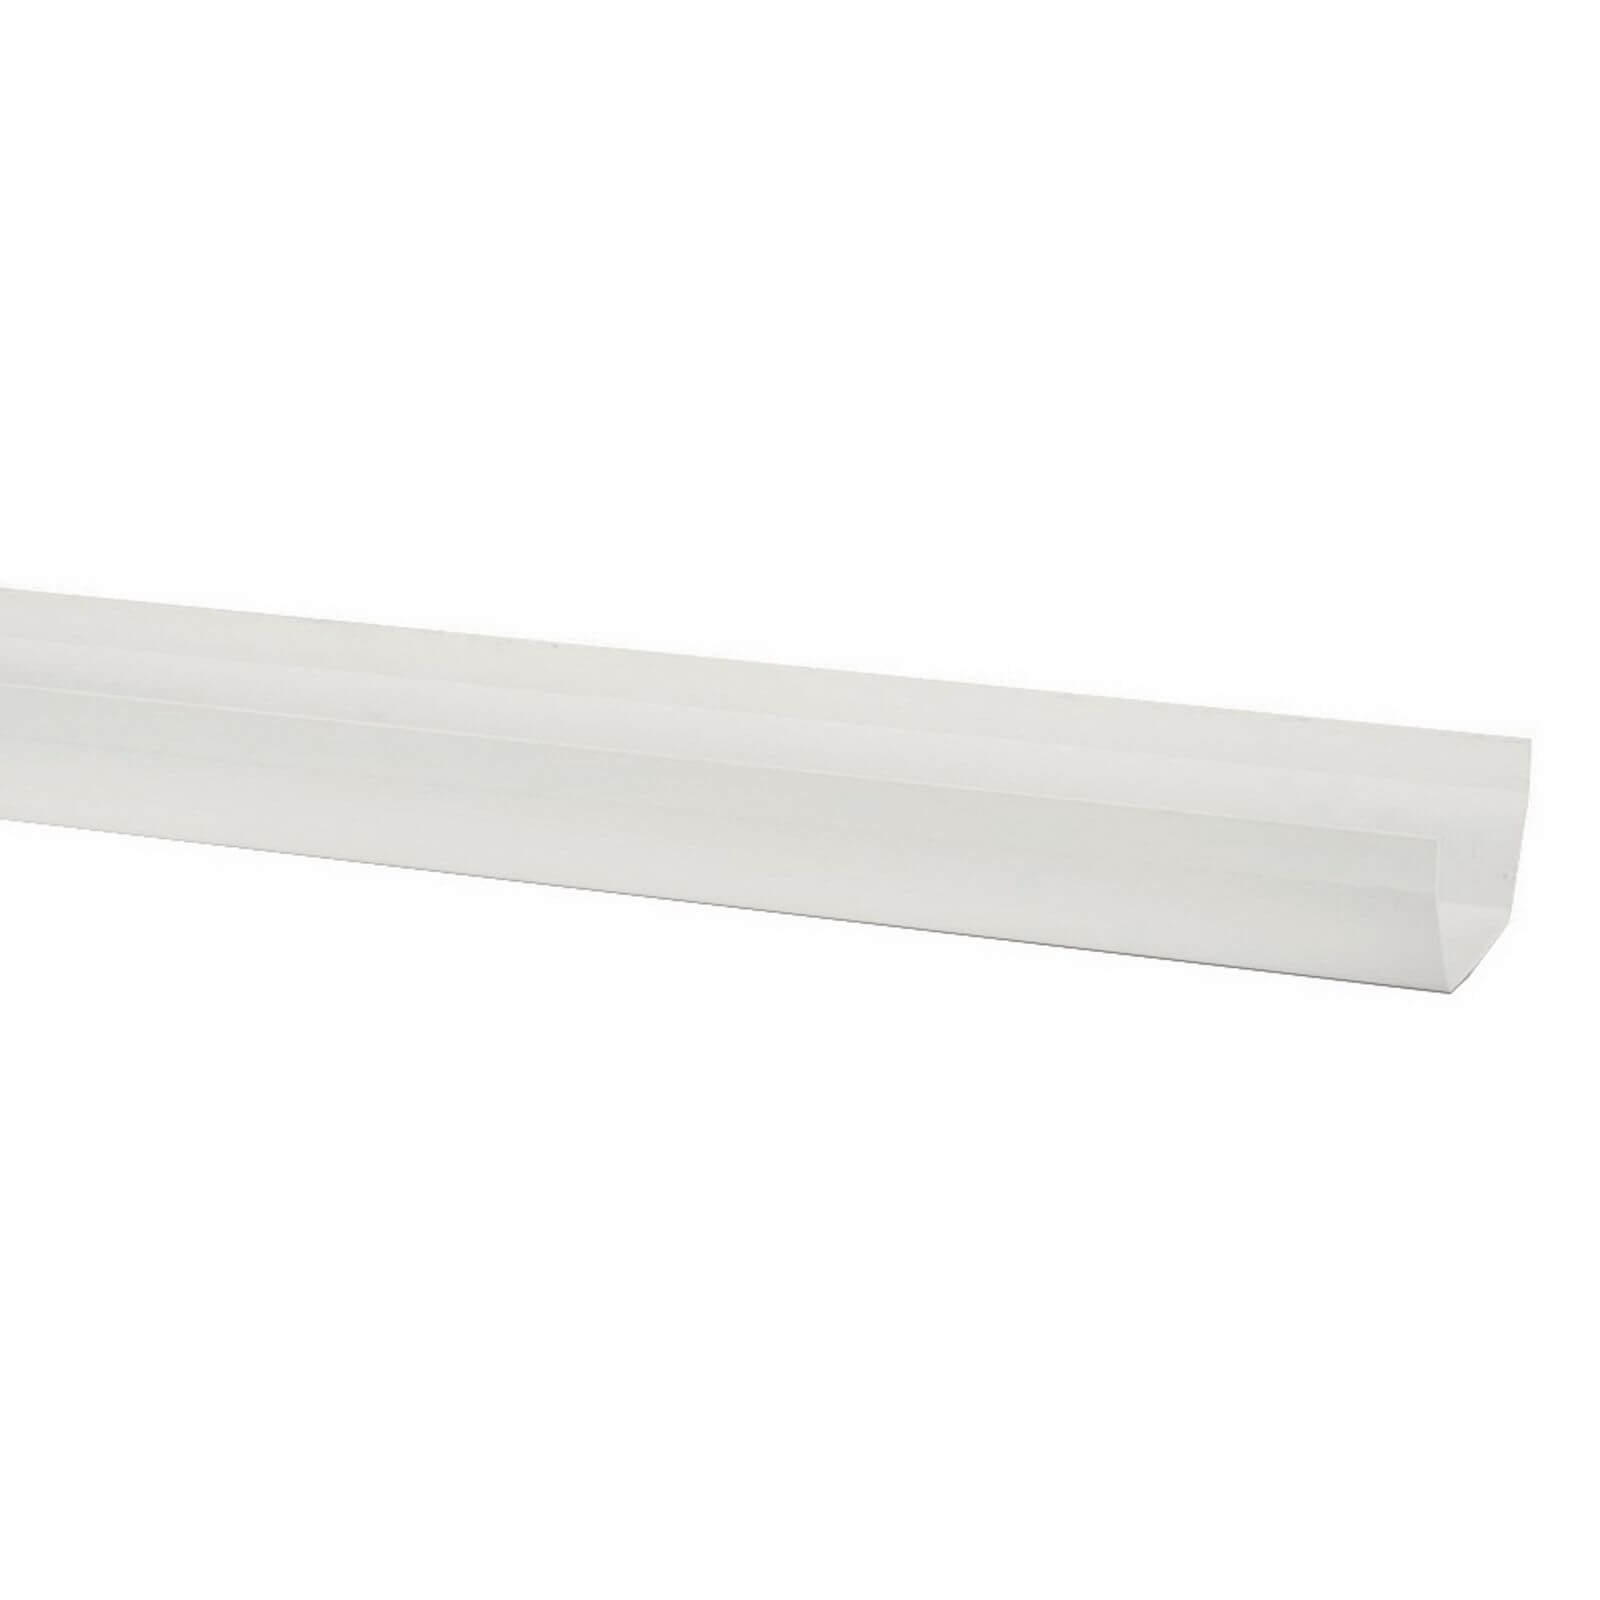 Polypipe Square Gutter - 112mm x 2m - White